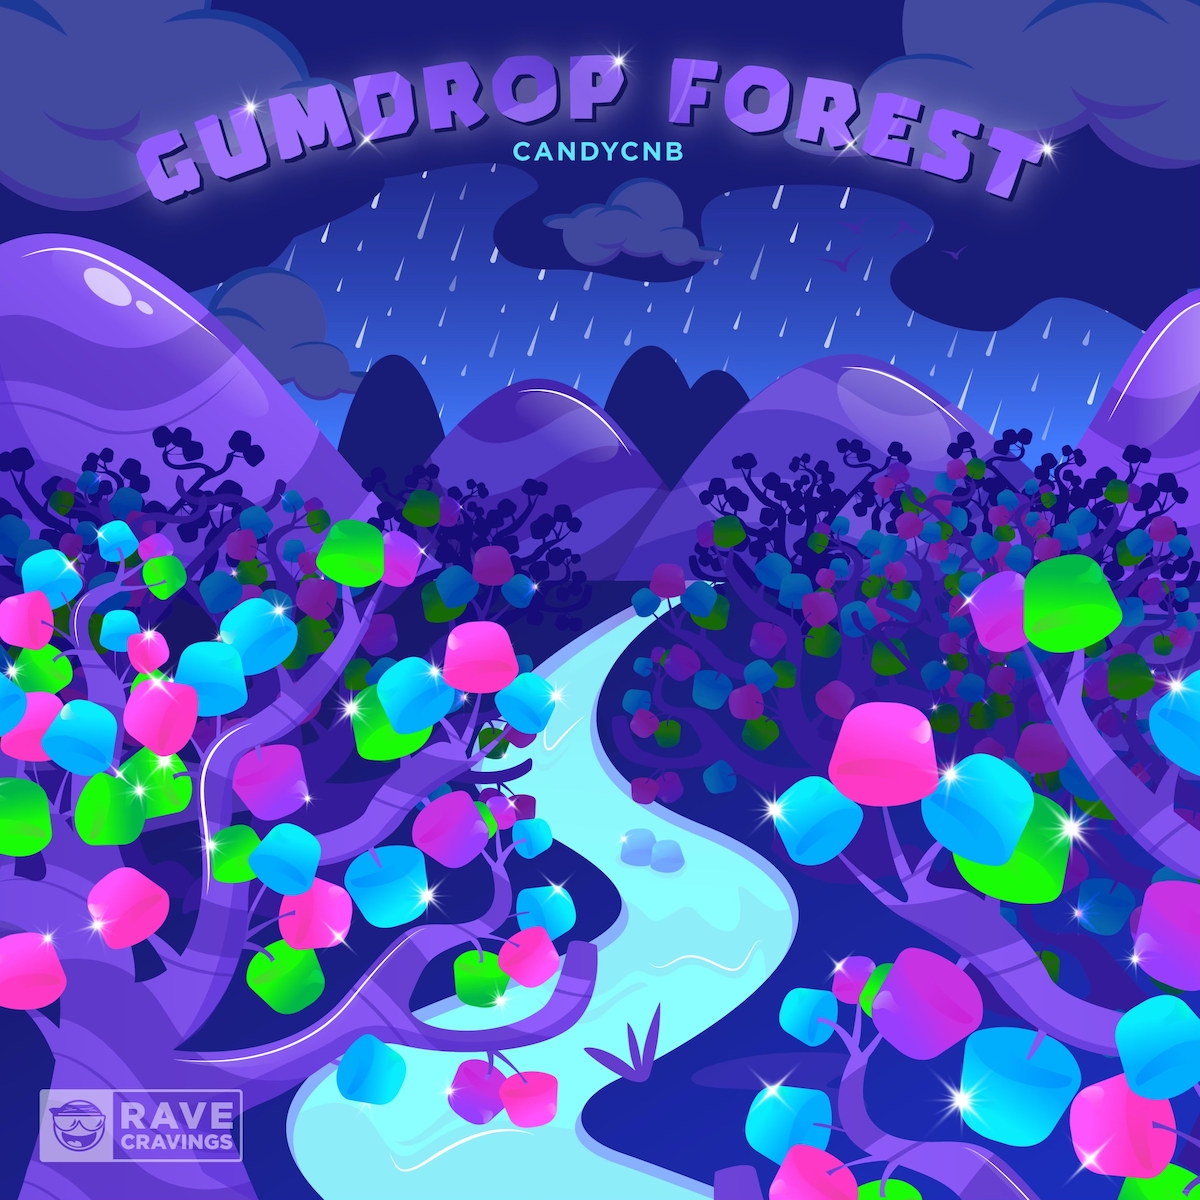 DEBUT EP REVIEW: Gumdrop Forest by CANDYCNB